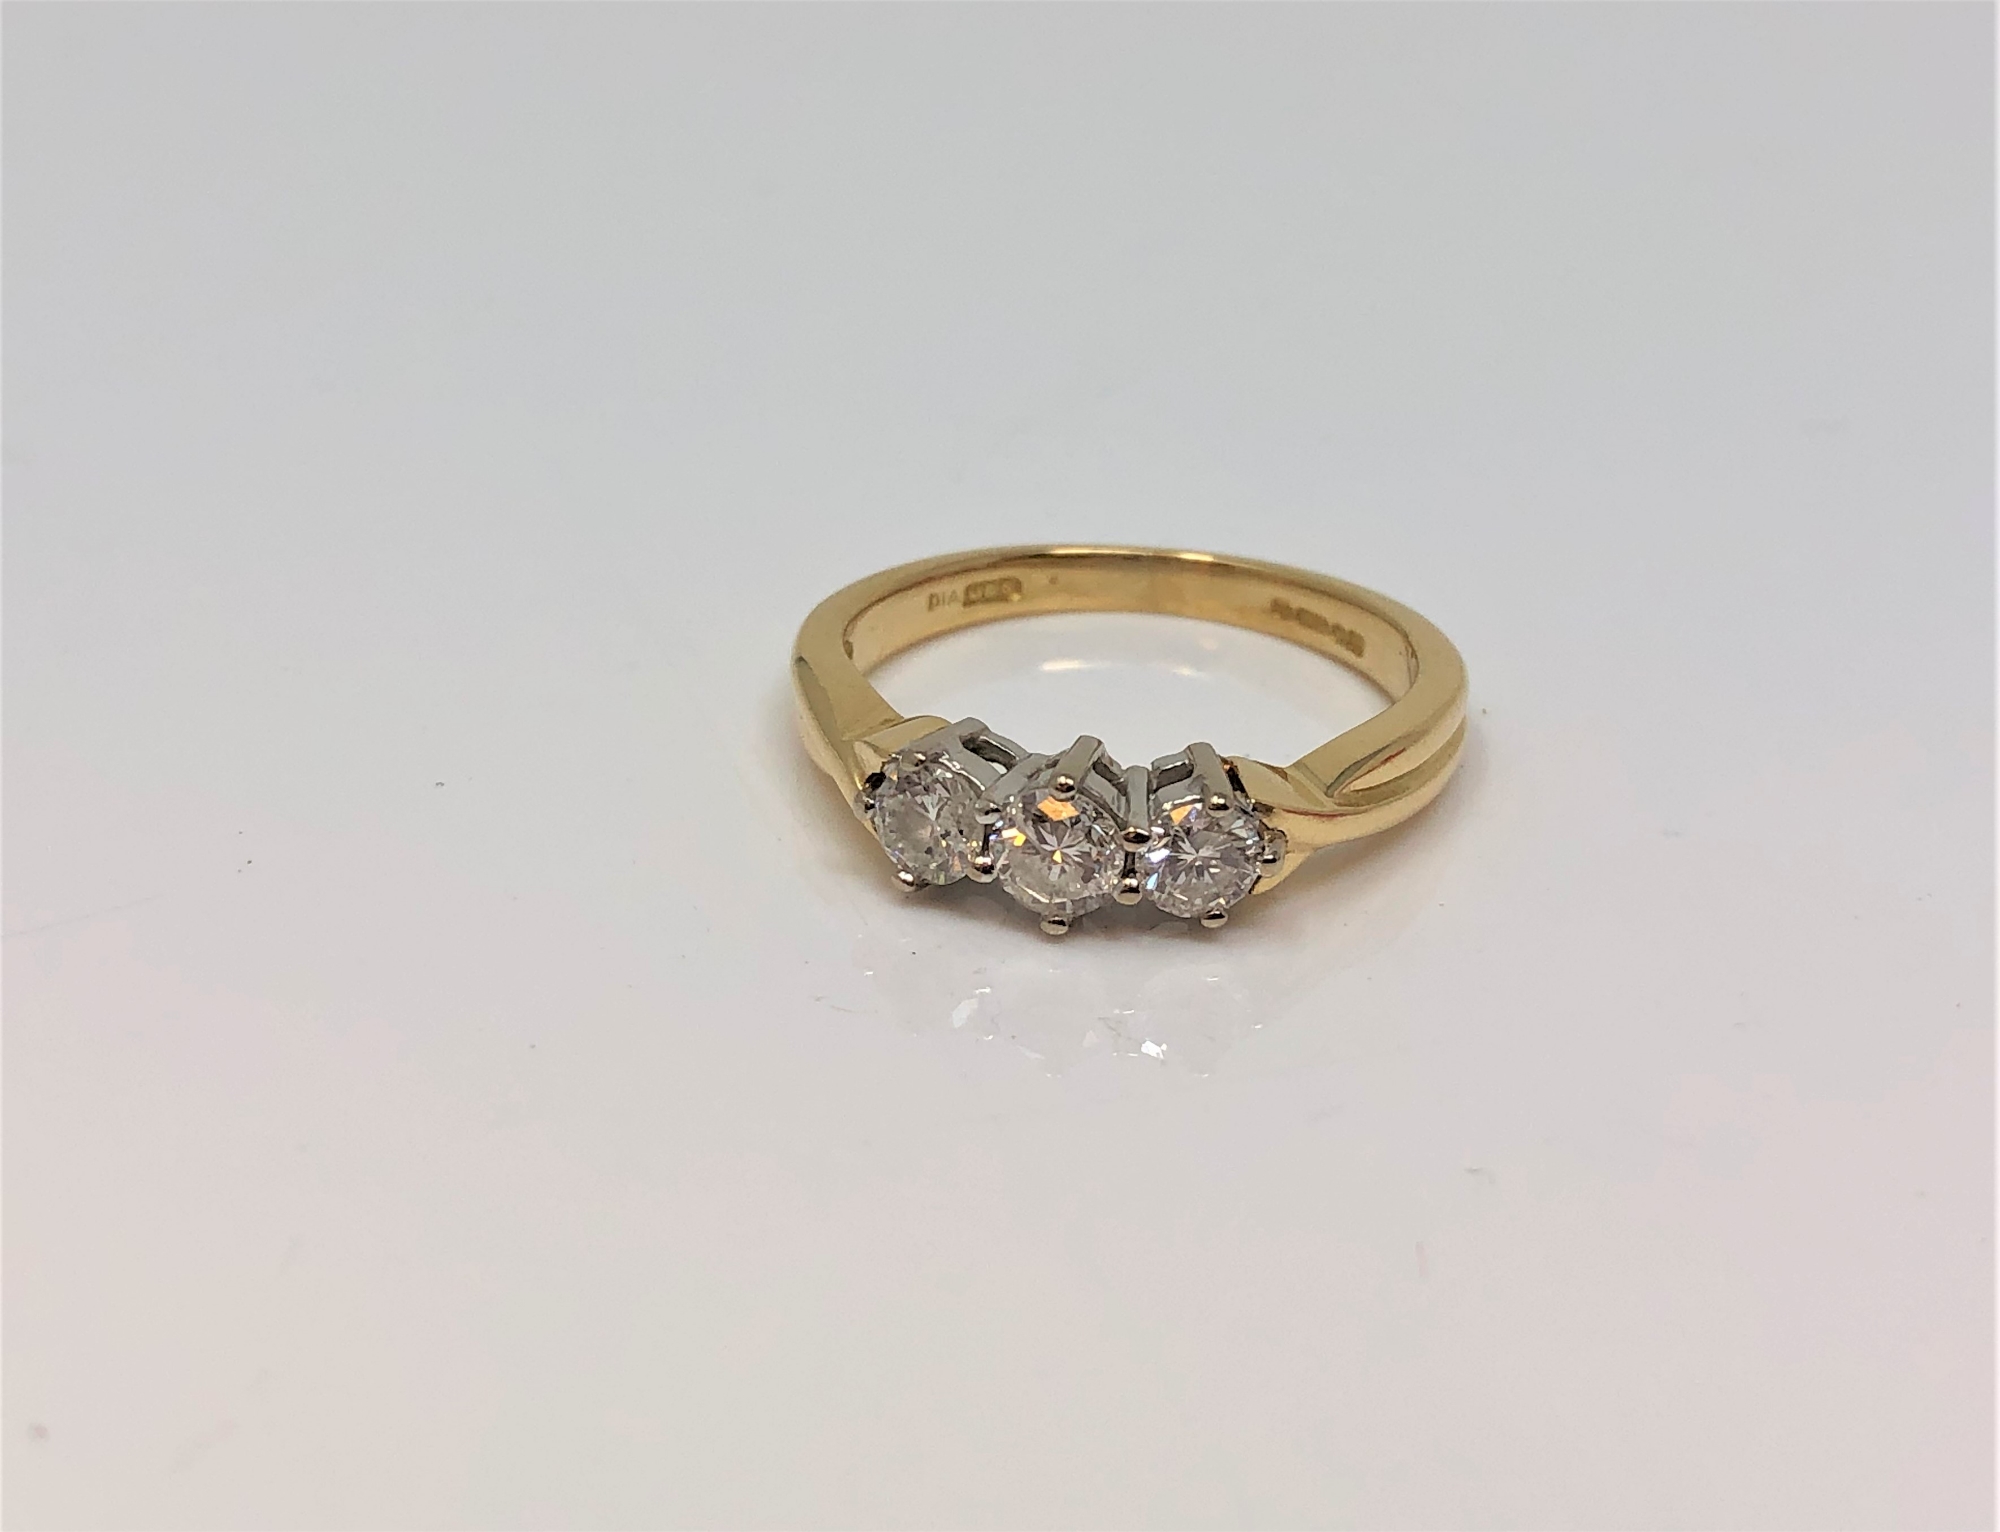 An 18ct gold three stone diamond ring, approximately 0.